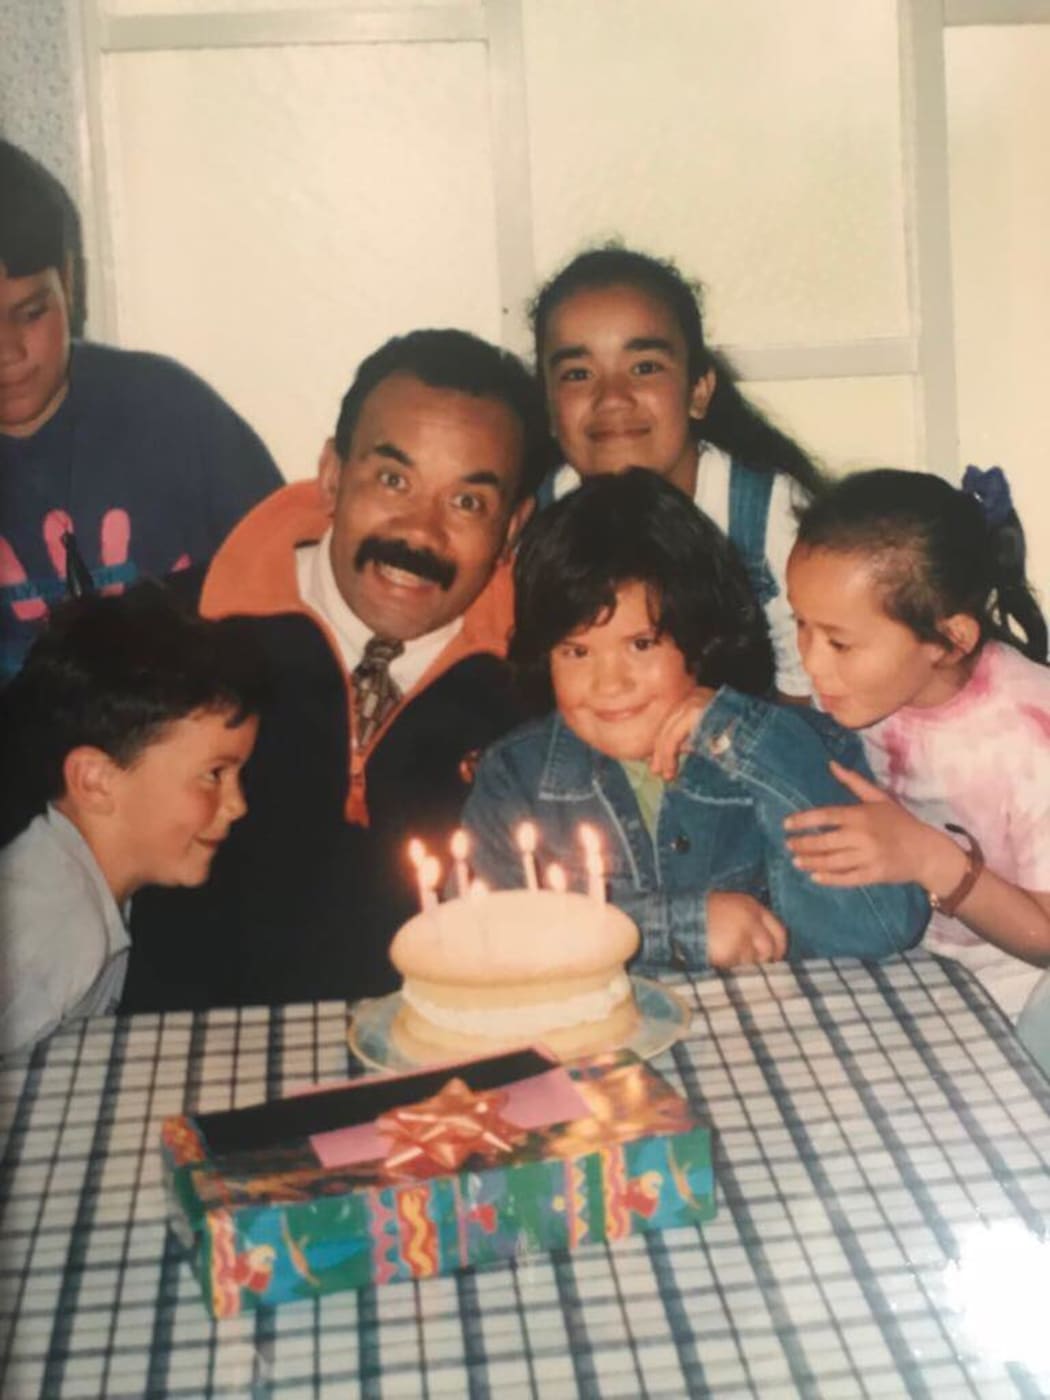 “He’s my superman”. A Young Miria Flavell with her father, Māori Party leader Te Ururoa Flavell.